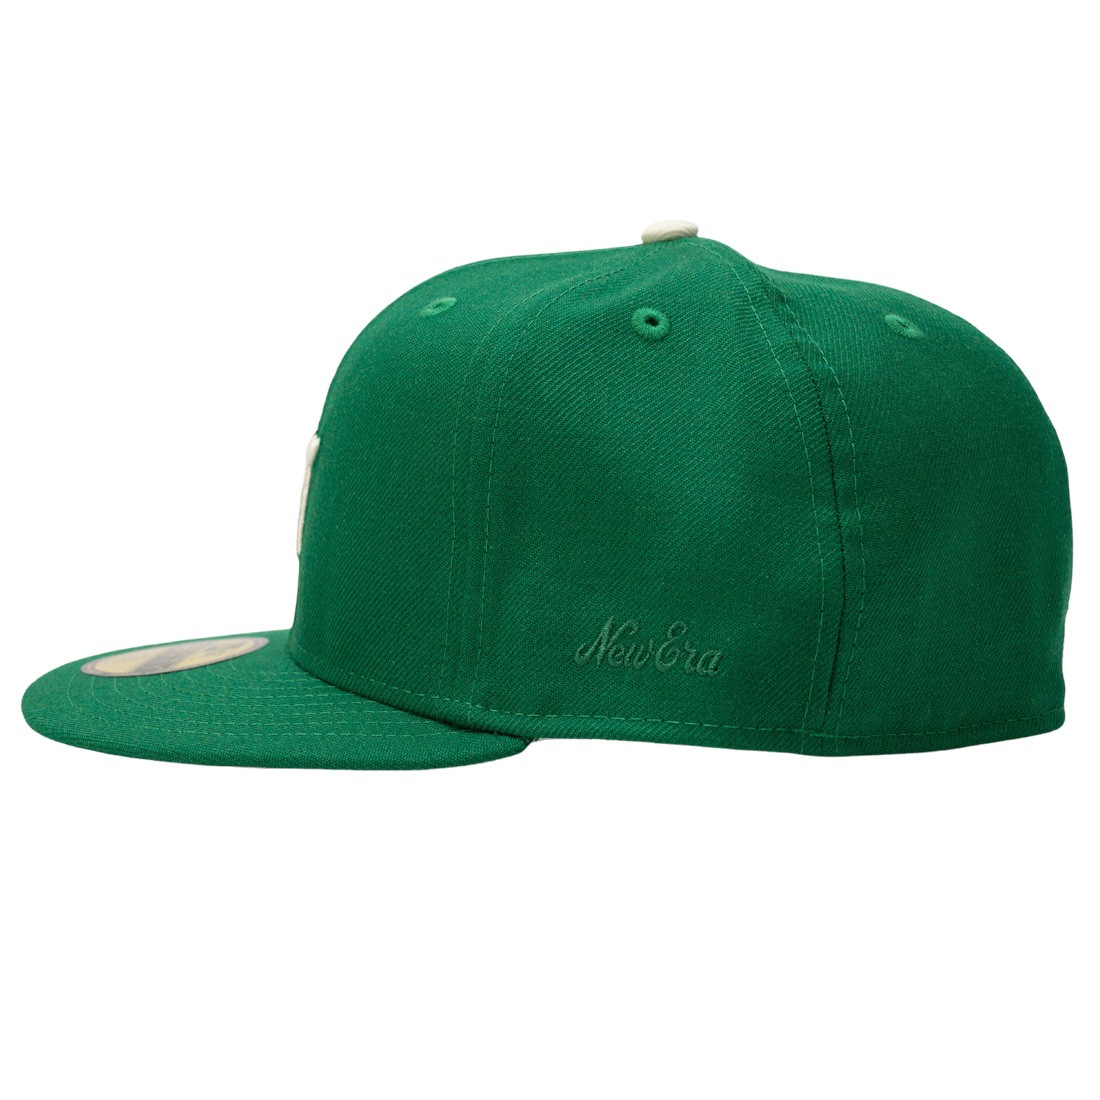 new era x fear of god essentials 59fifty fitted cap green